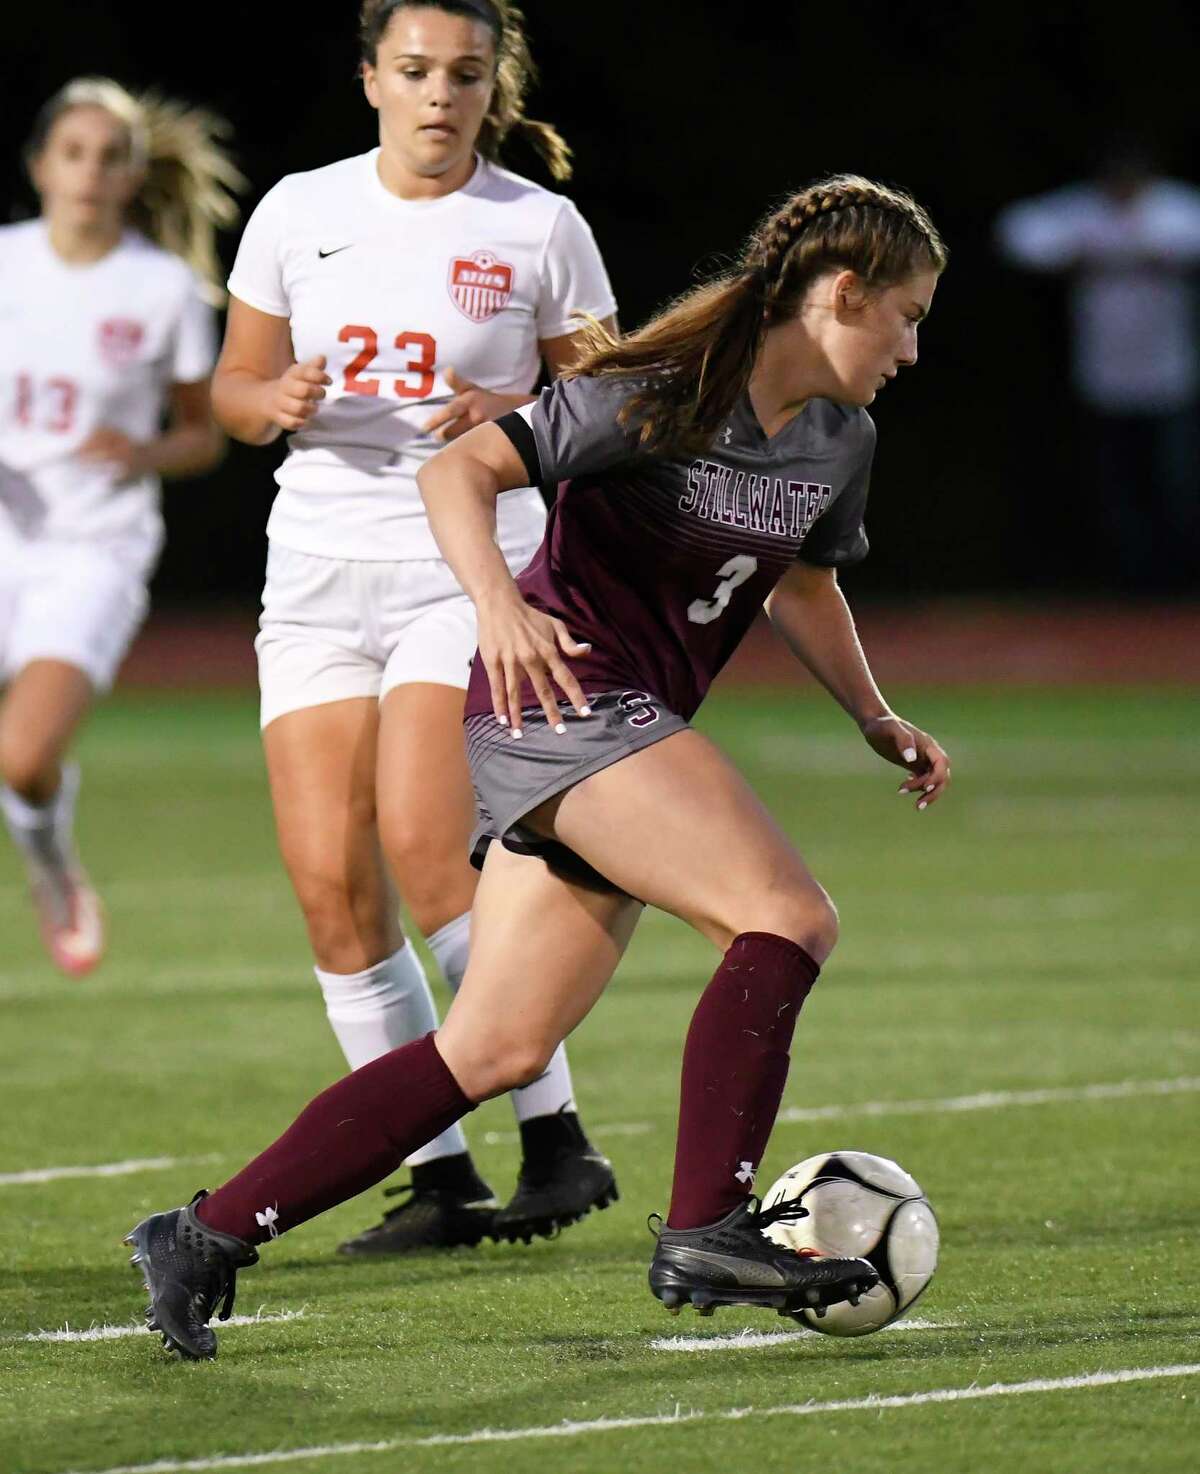 Stillwater's Brooke Picketts (3) moves the ball against Mechanicville during a Section II girls' high school soccer game in Stillwater, N.Y., Monday, Sept.16, 2019. (Hans Pennink / Special to the Times Union)